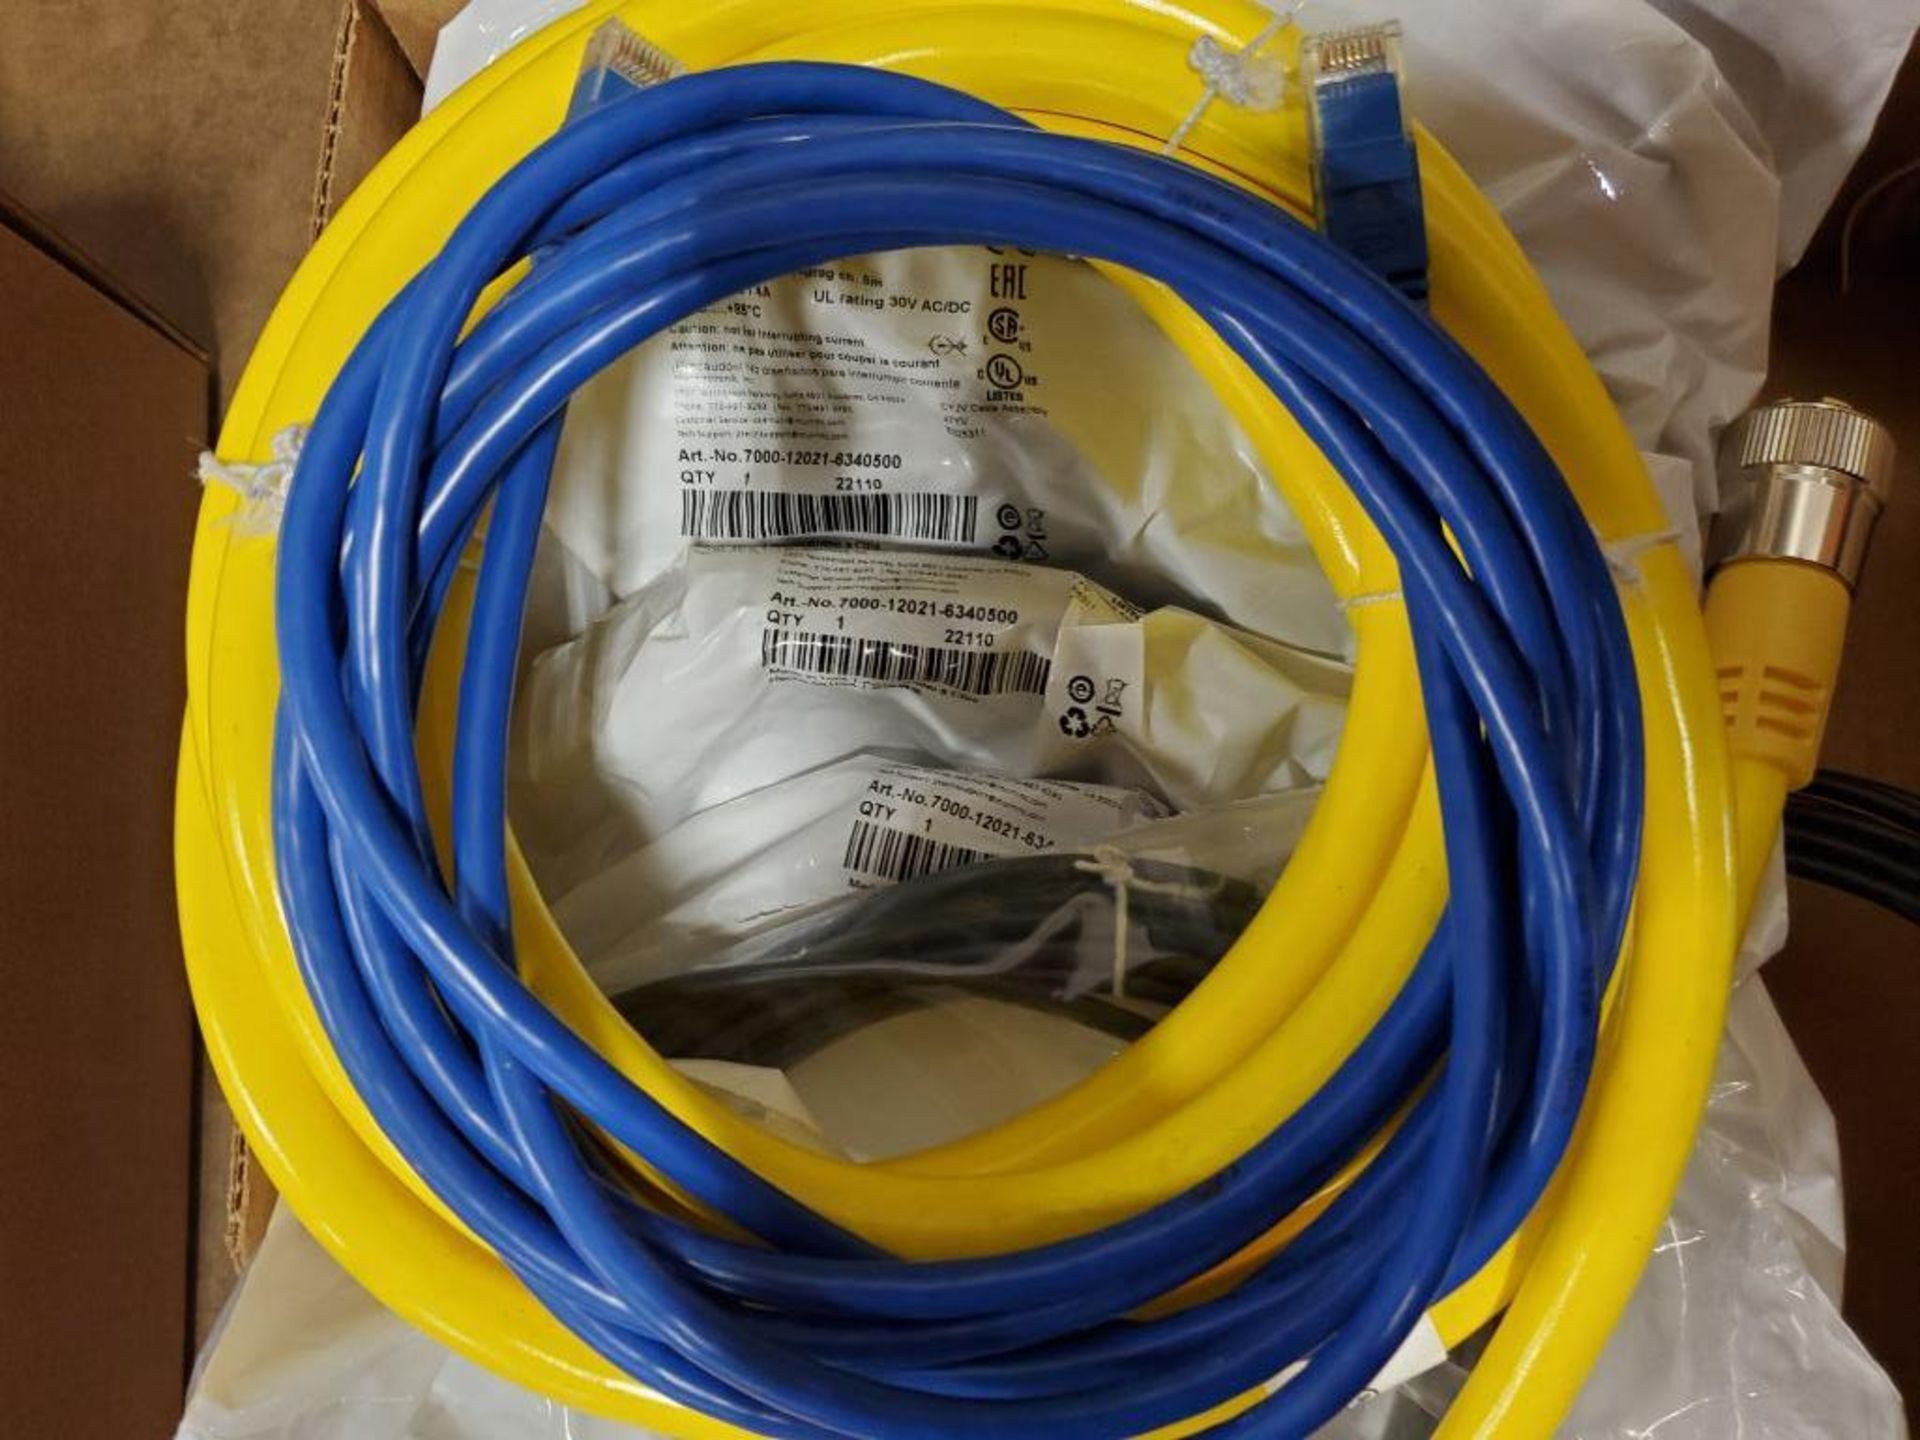 Qty 10 - Assorted electrical cables. Murr, Pepperl+Fuchs. New. - Image 5 of 7